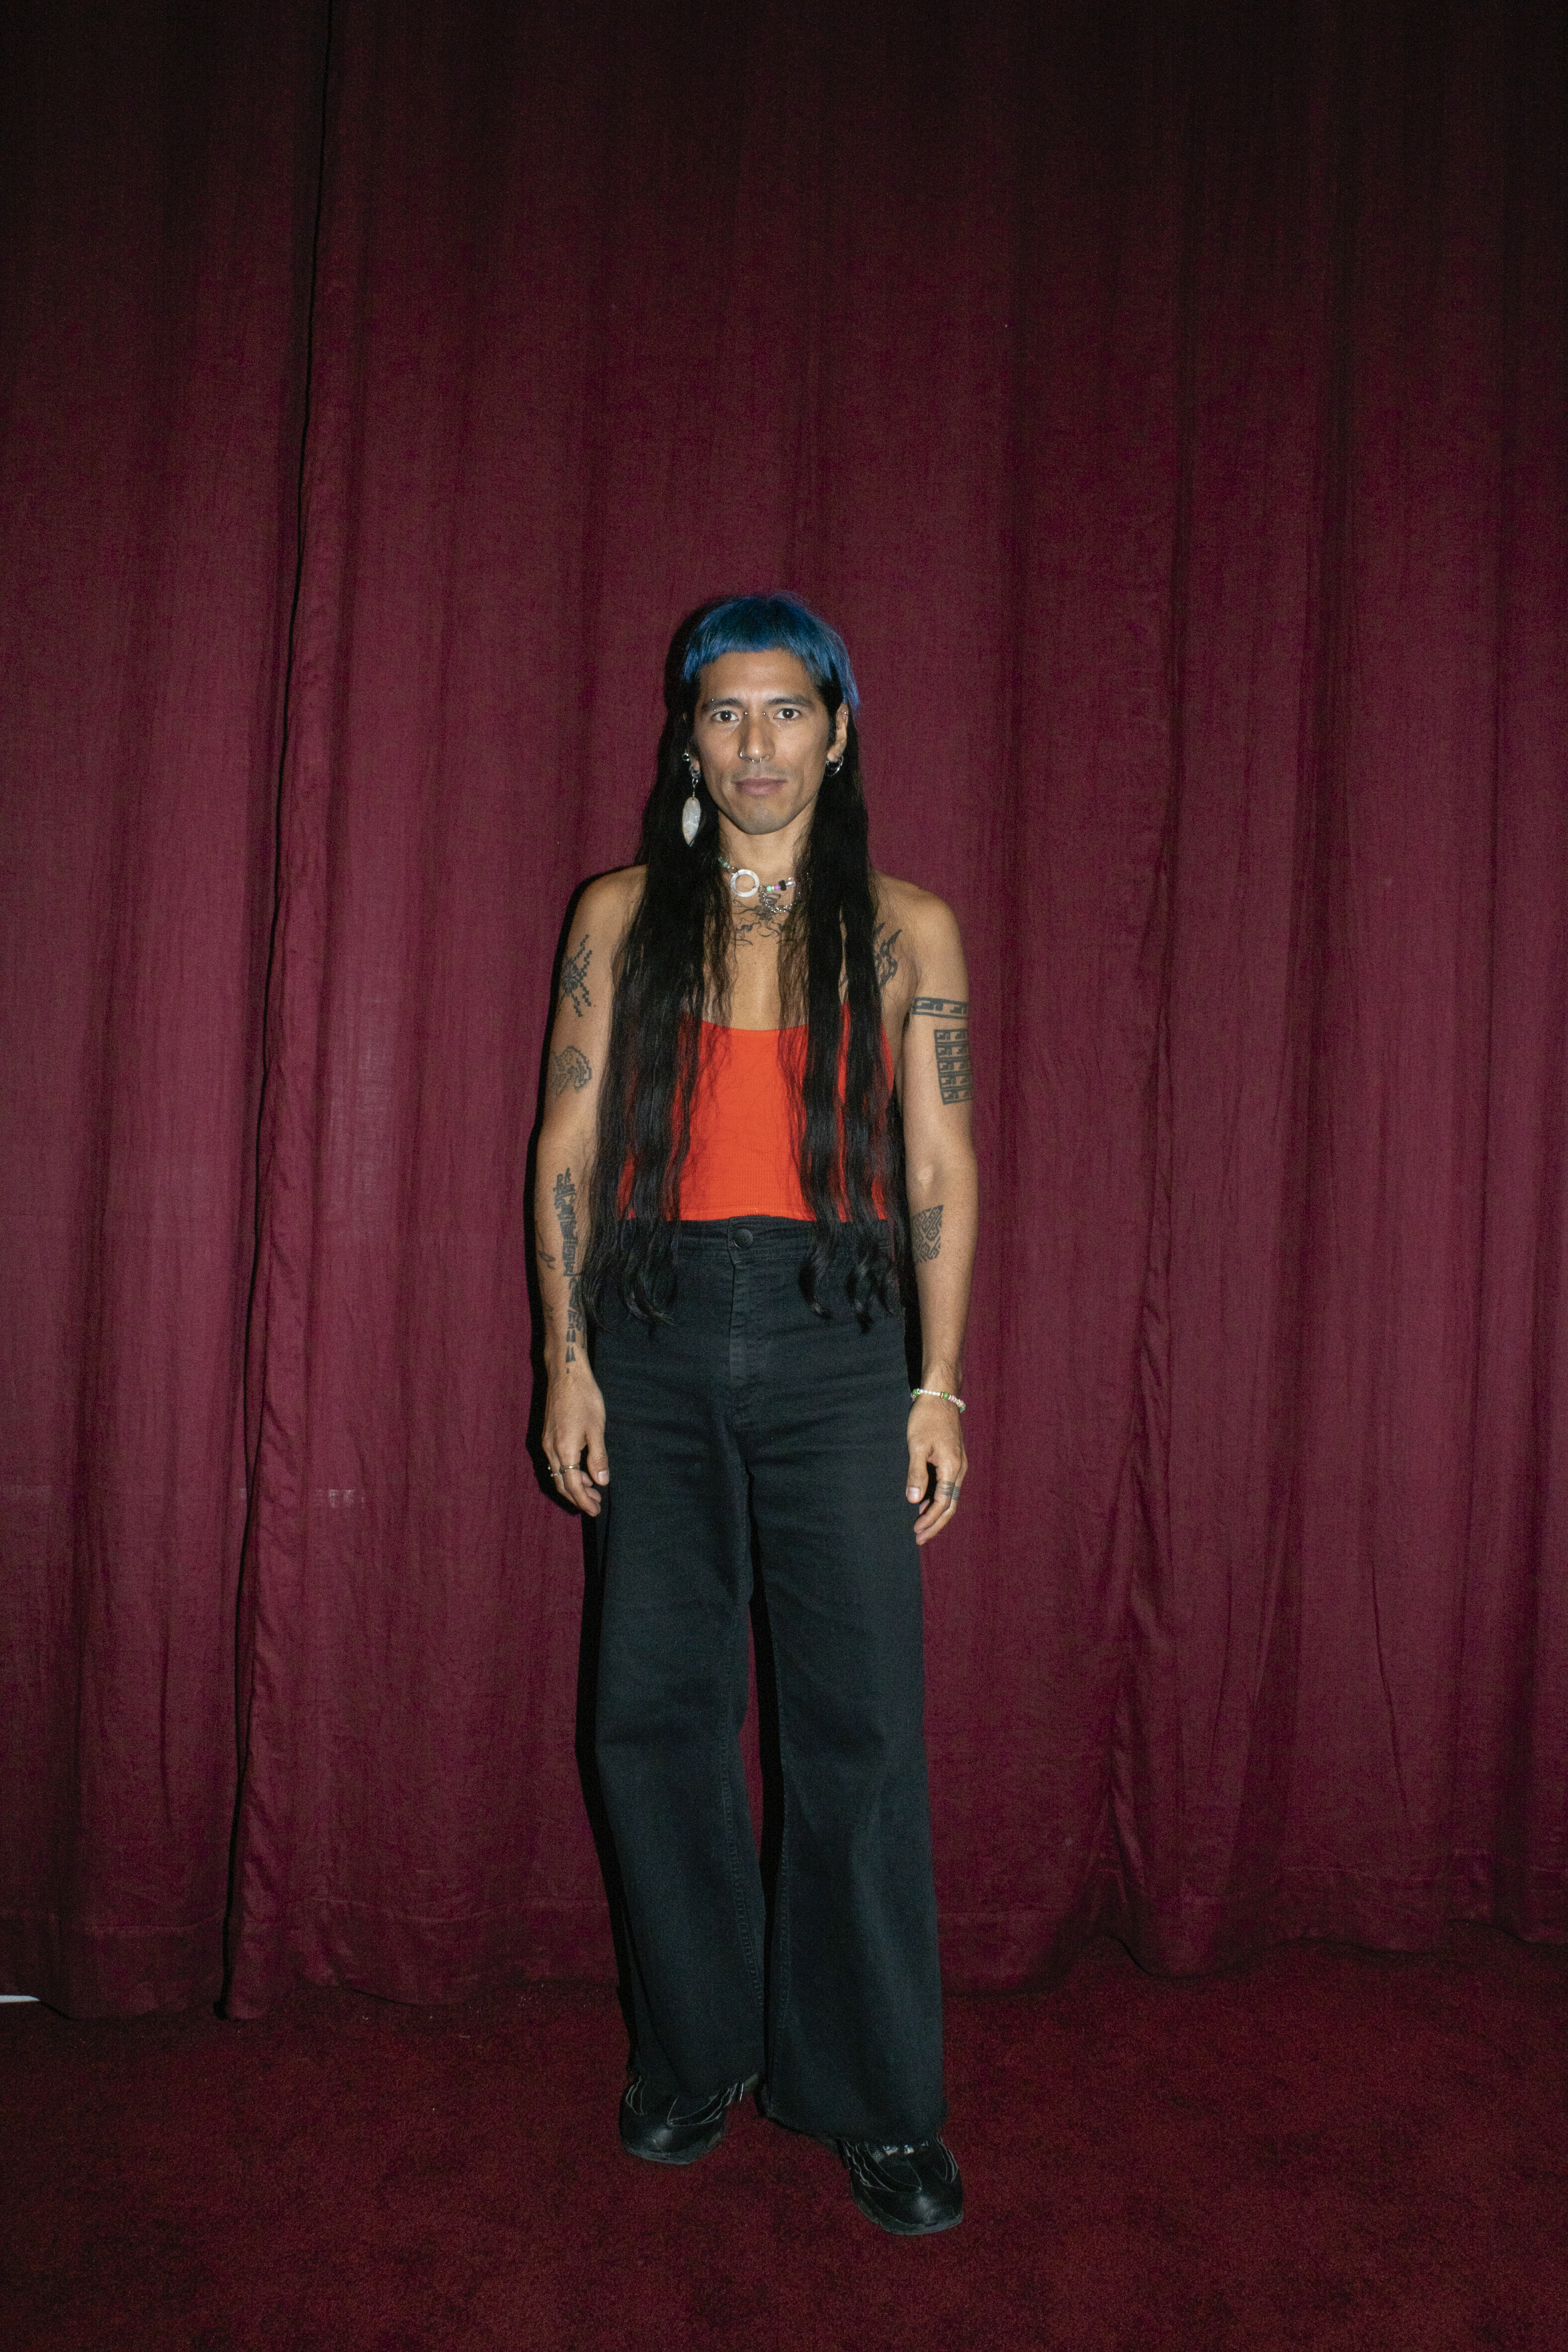 a person with tattoos and hip-length dark hair dyed bright blue at the roots stands in front of a red curtain